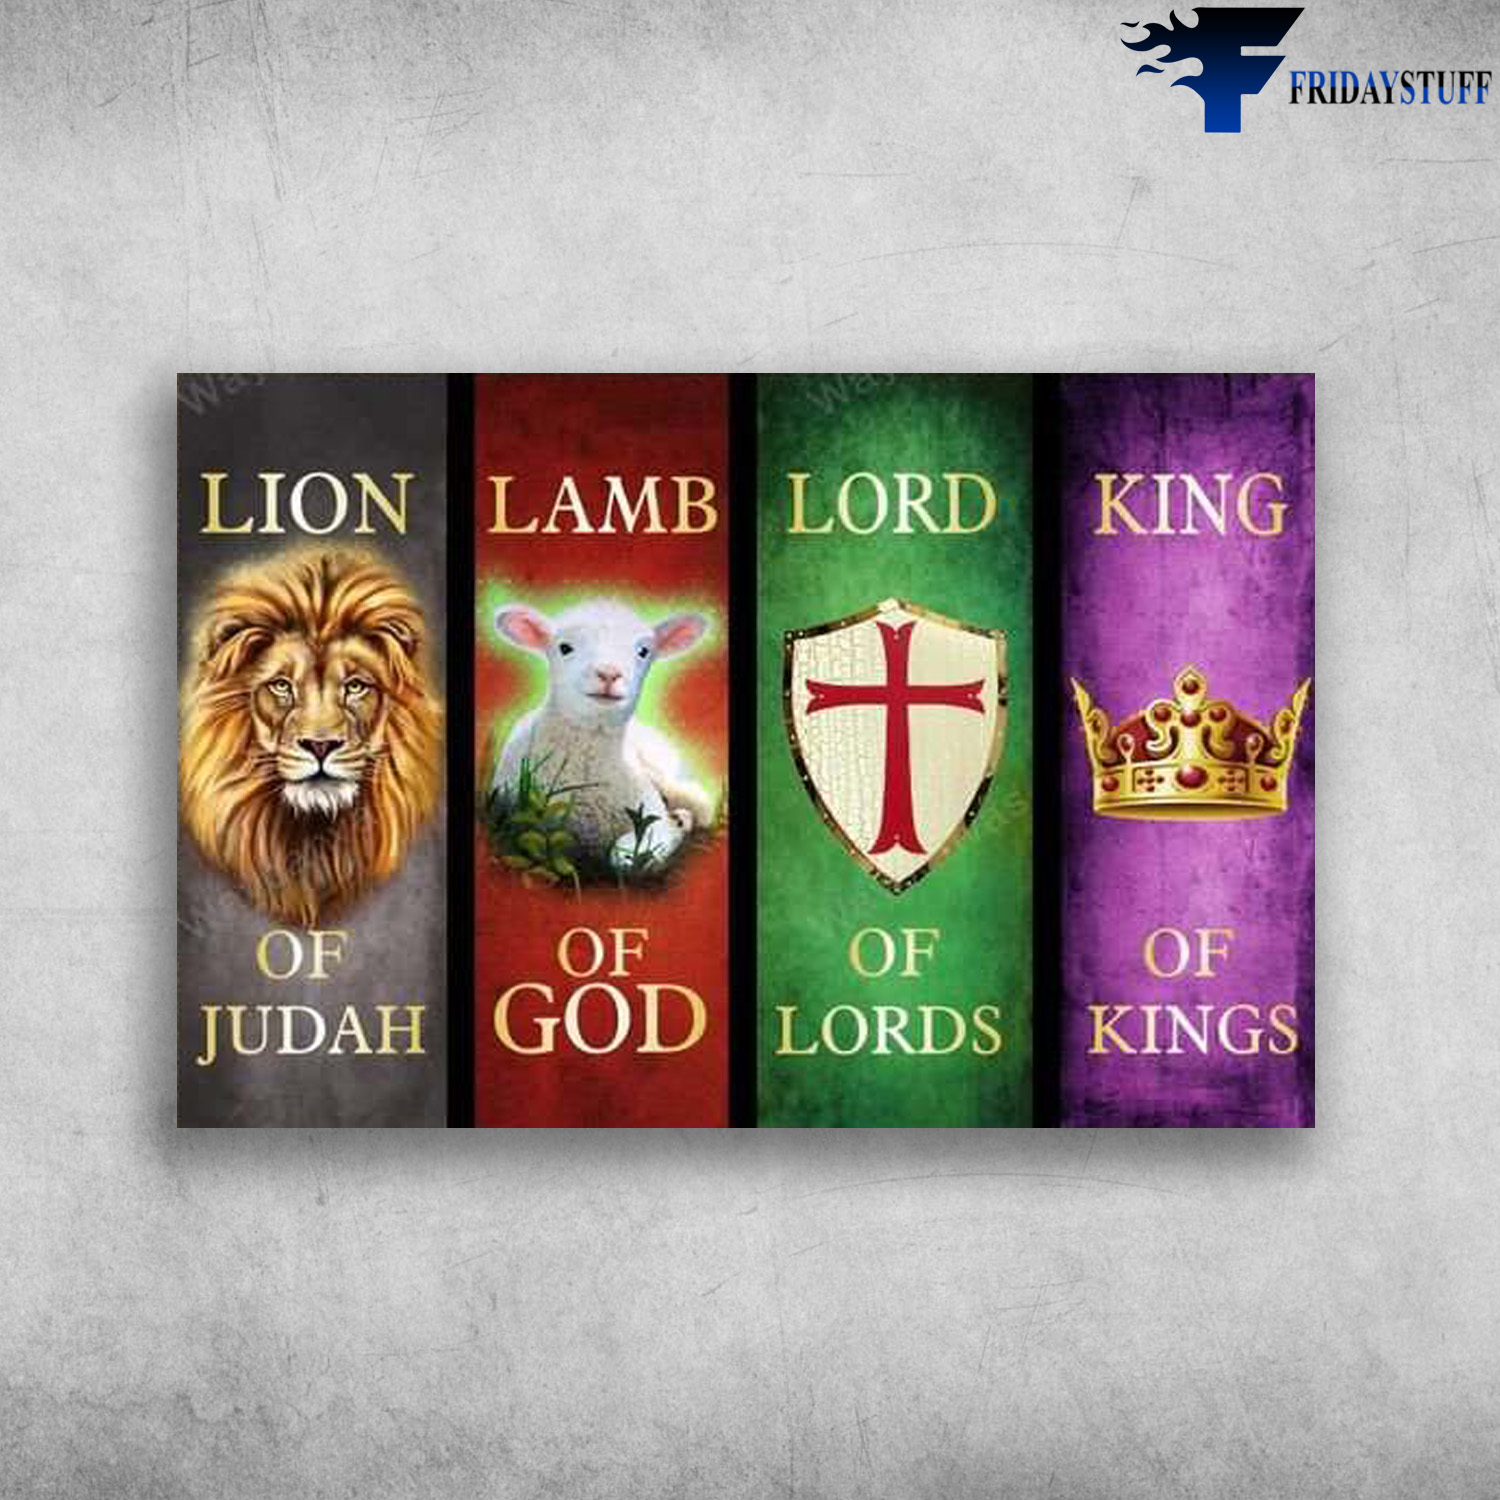 Lion Lamb, Lord King - Lion Of Judah, Lamb Of God, Lord Of Lords, King Of Kings